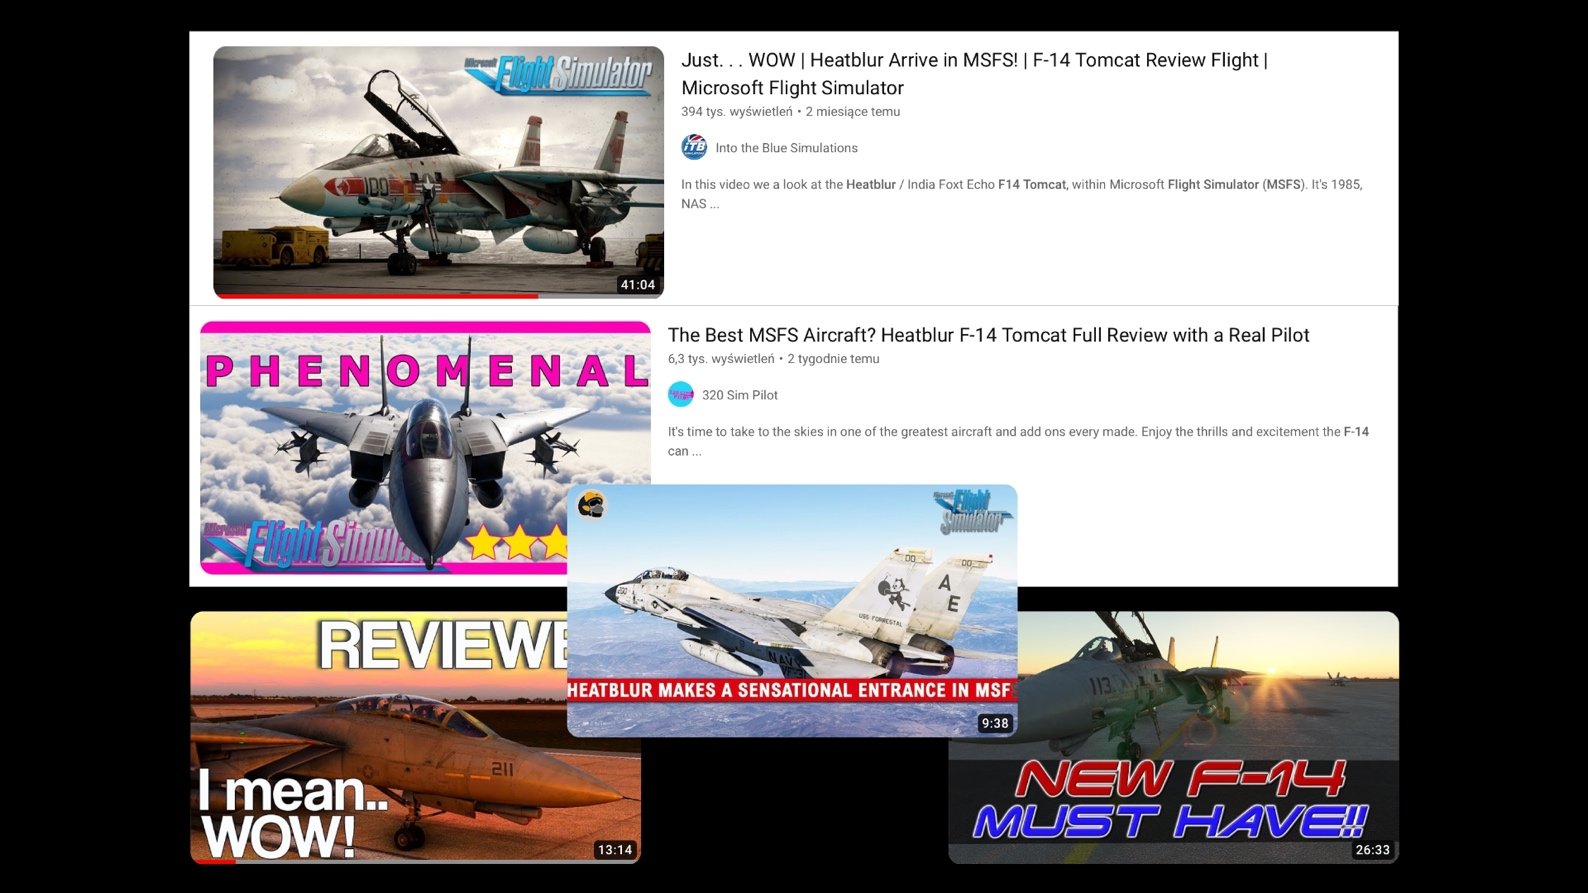 The headlines of reviews after the premiere of Heatblur's first product on the Microsoft platform speak for themselves. - Experts in Realism, Household Name Synonymous With Quality - Conversation With Heatblur Team - dokument - 2024-03-11